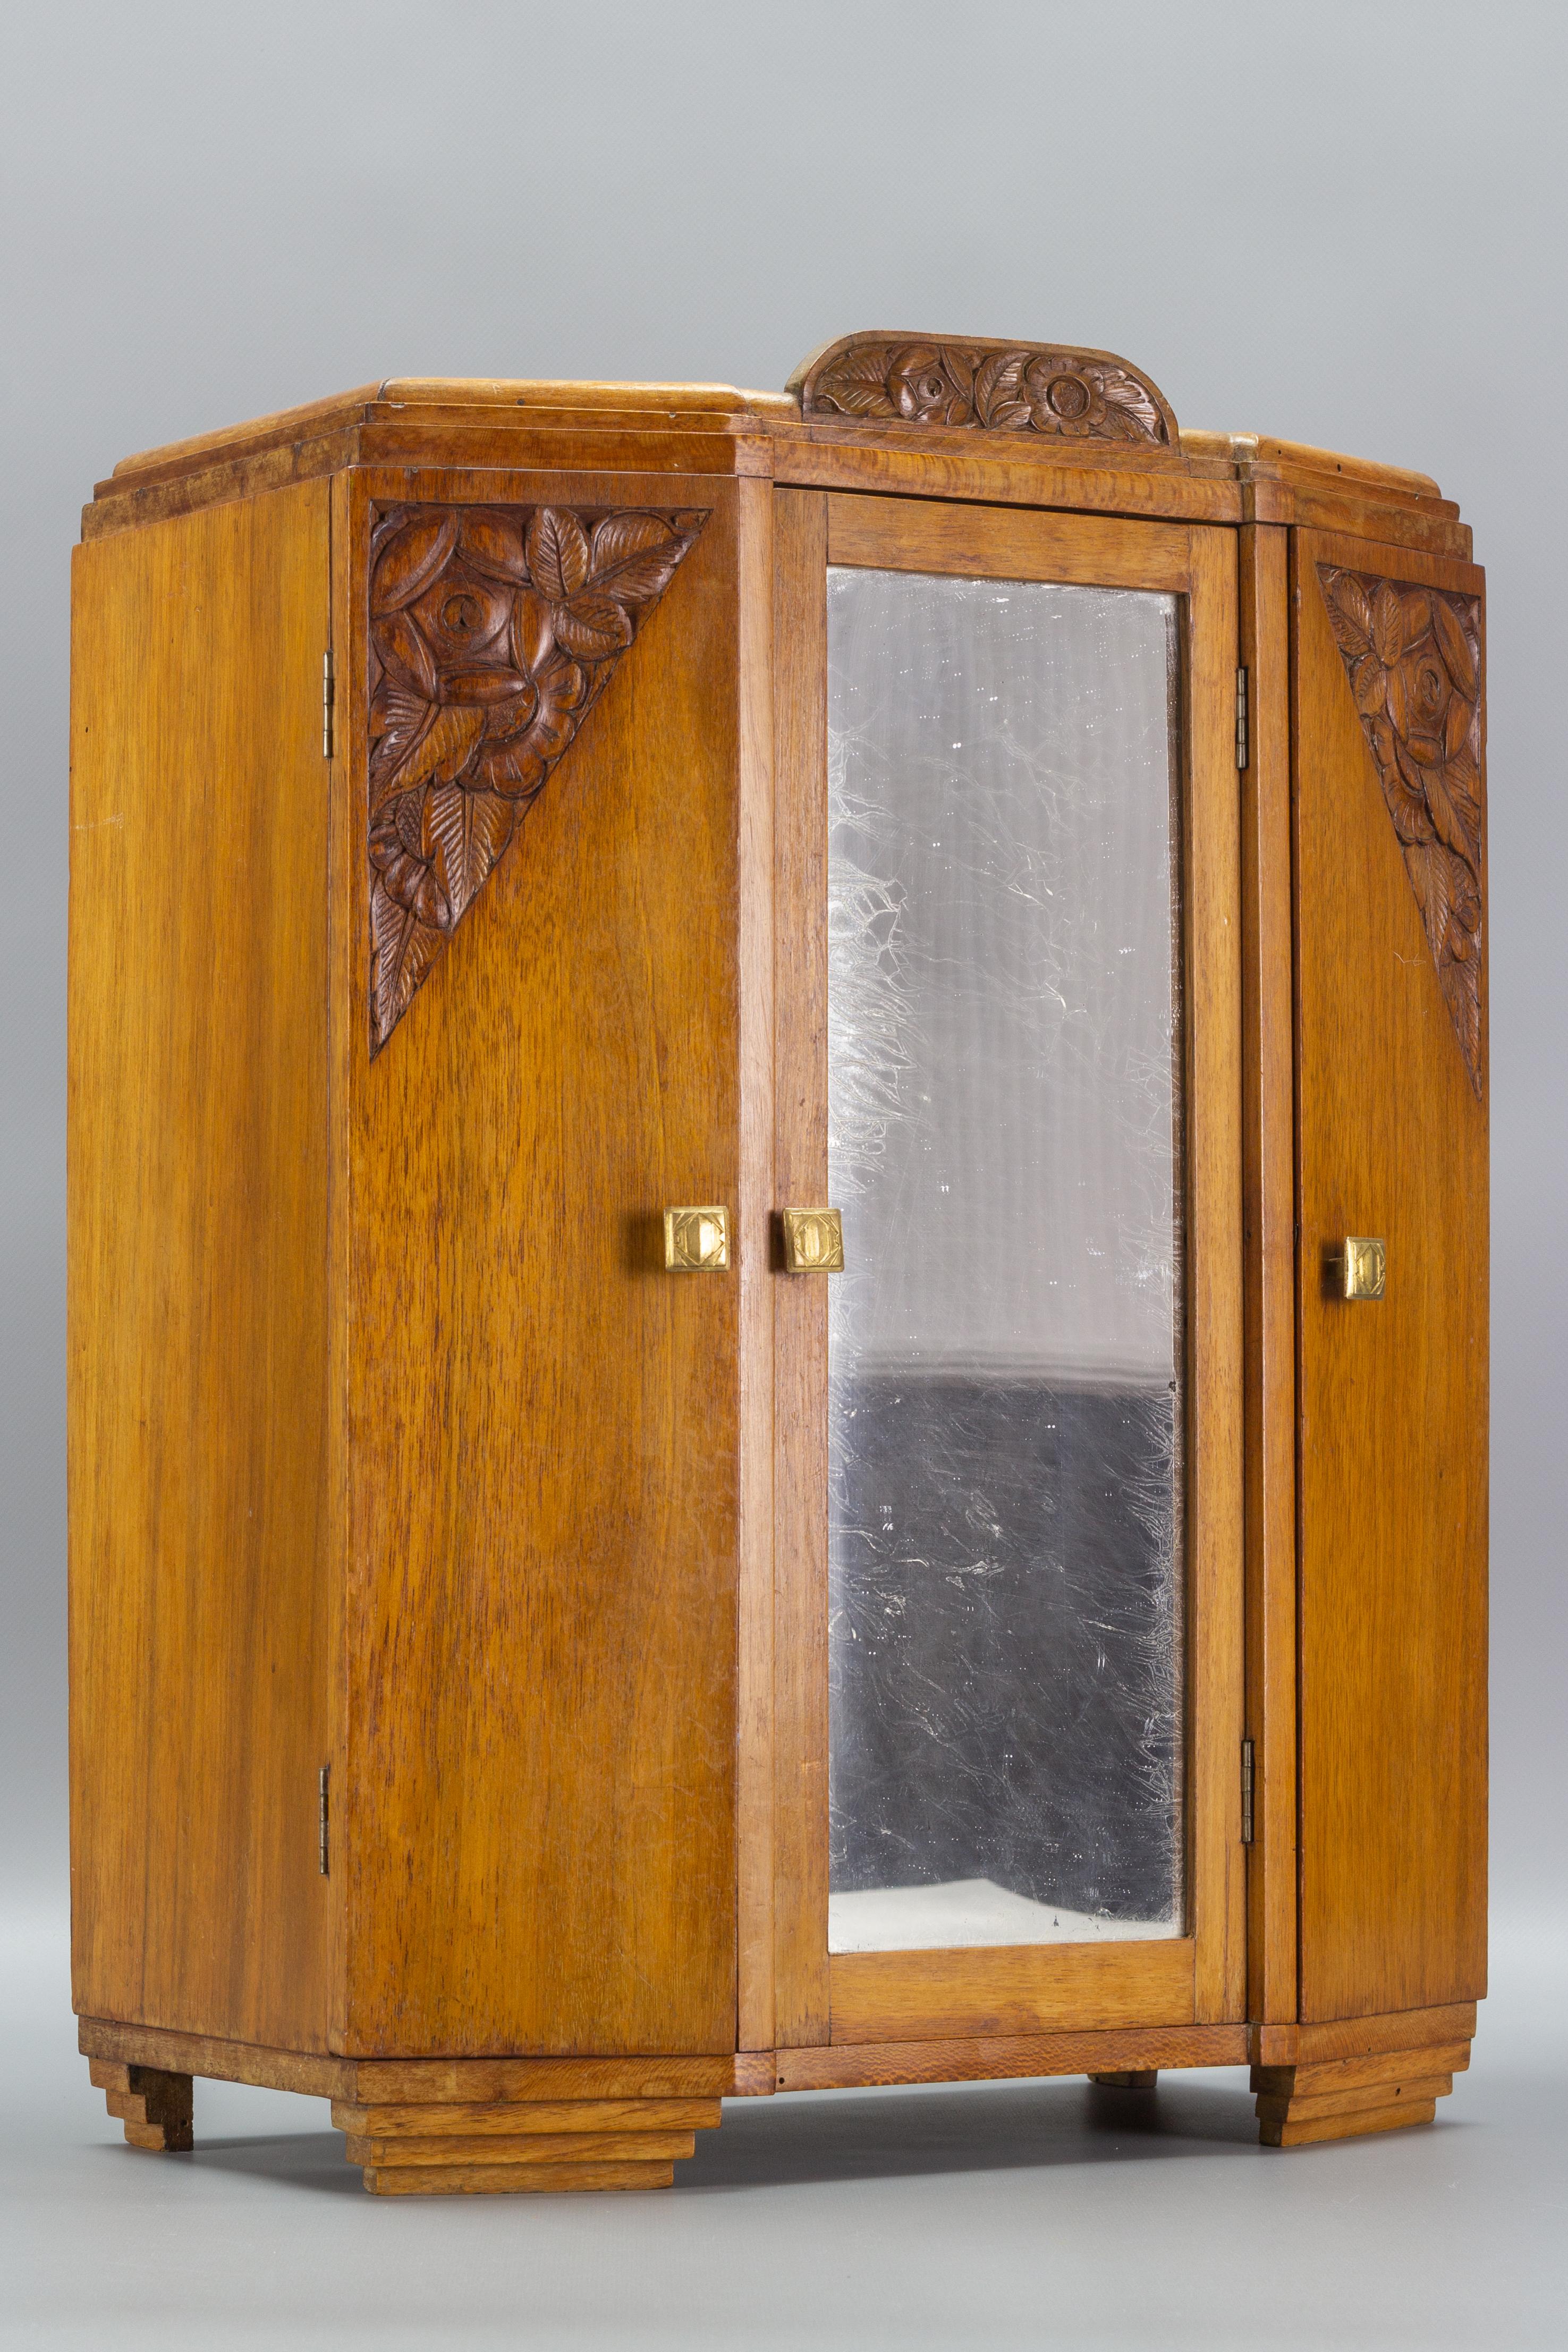 Unique and stunning French Art Deco three-door miniature armoire with mirror, brass handles, and hand-carved floral ornaments. Two removable shelves. 
Most probably it was a prototype of a large Art Deco cabinet designed and handcrafted by a master